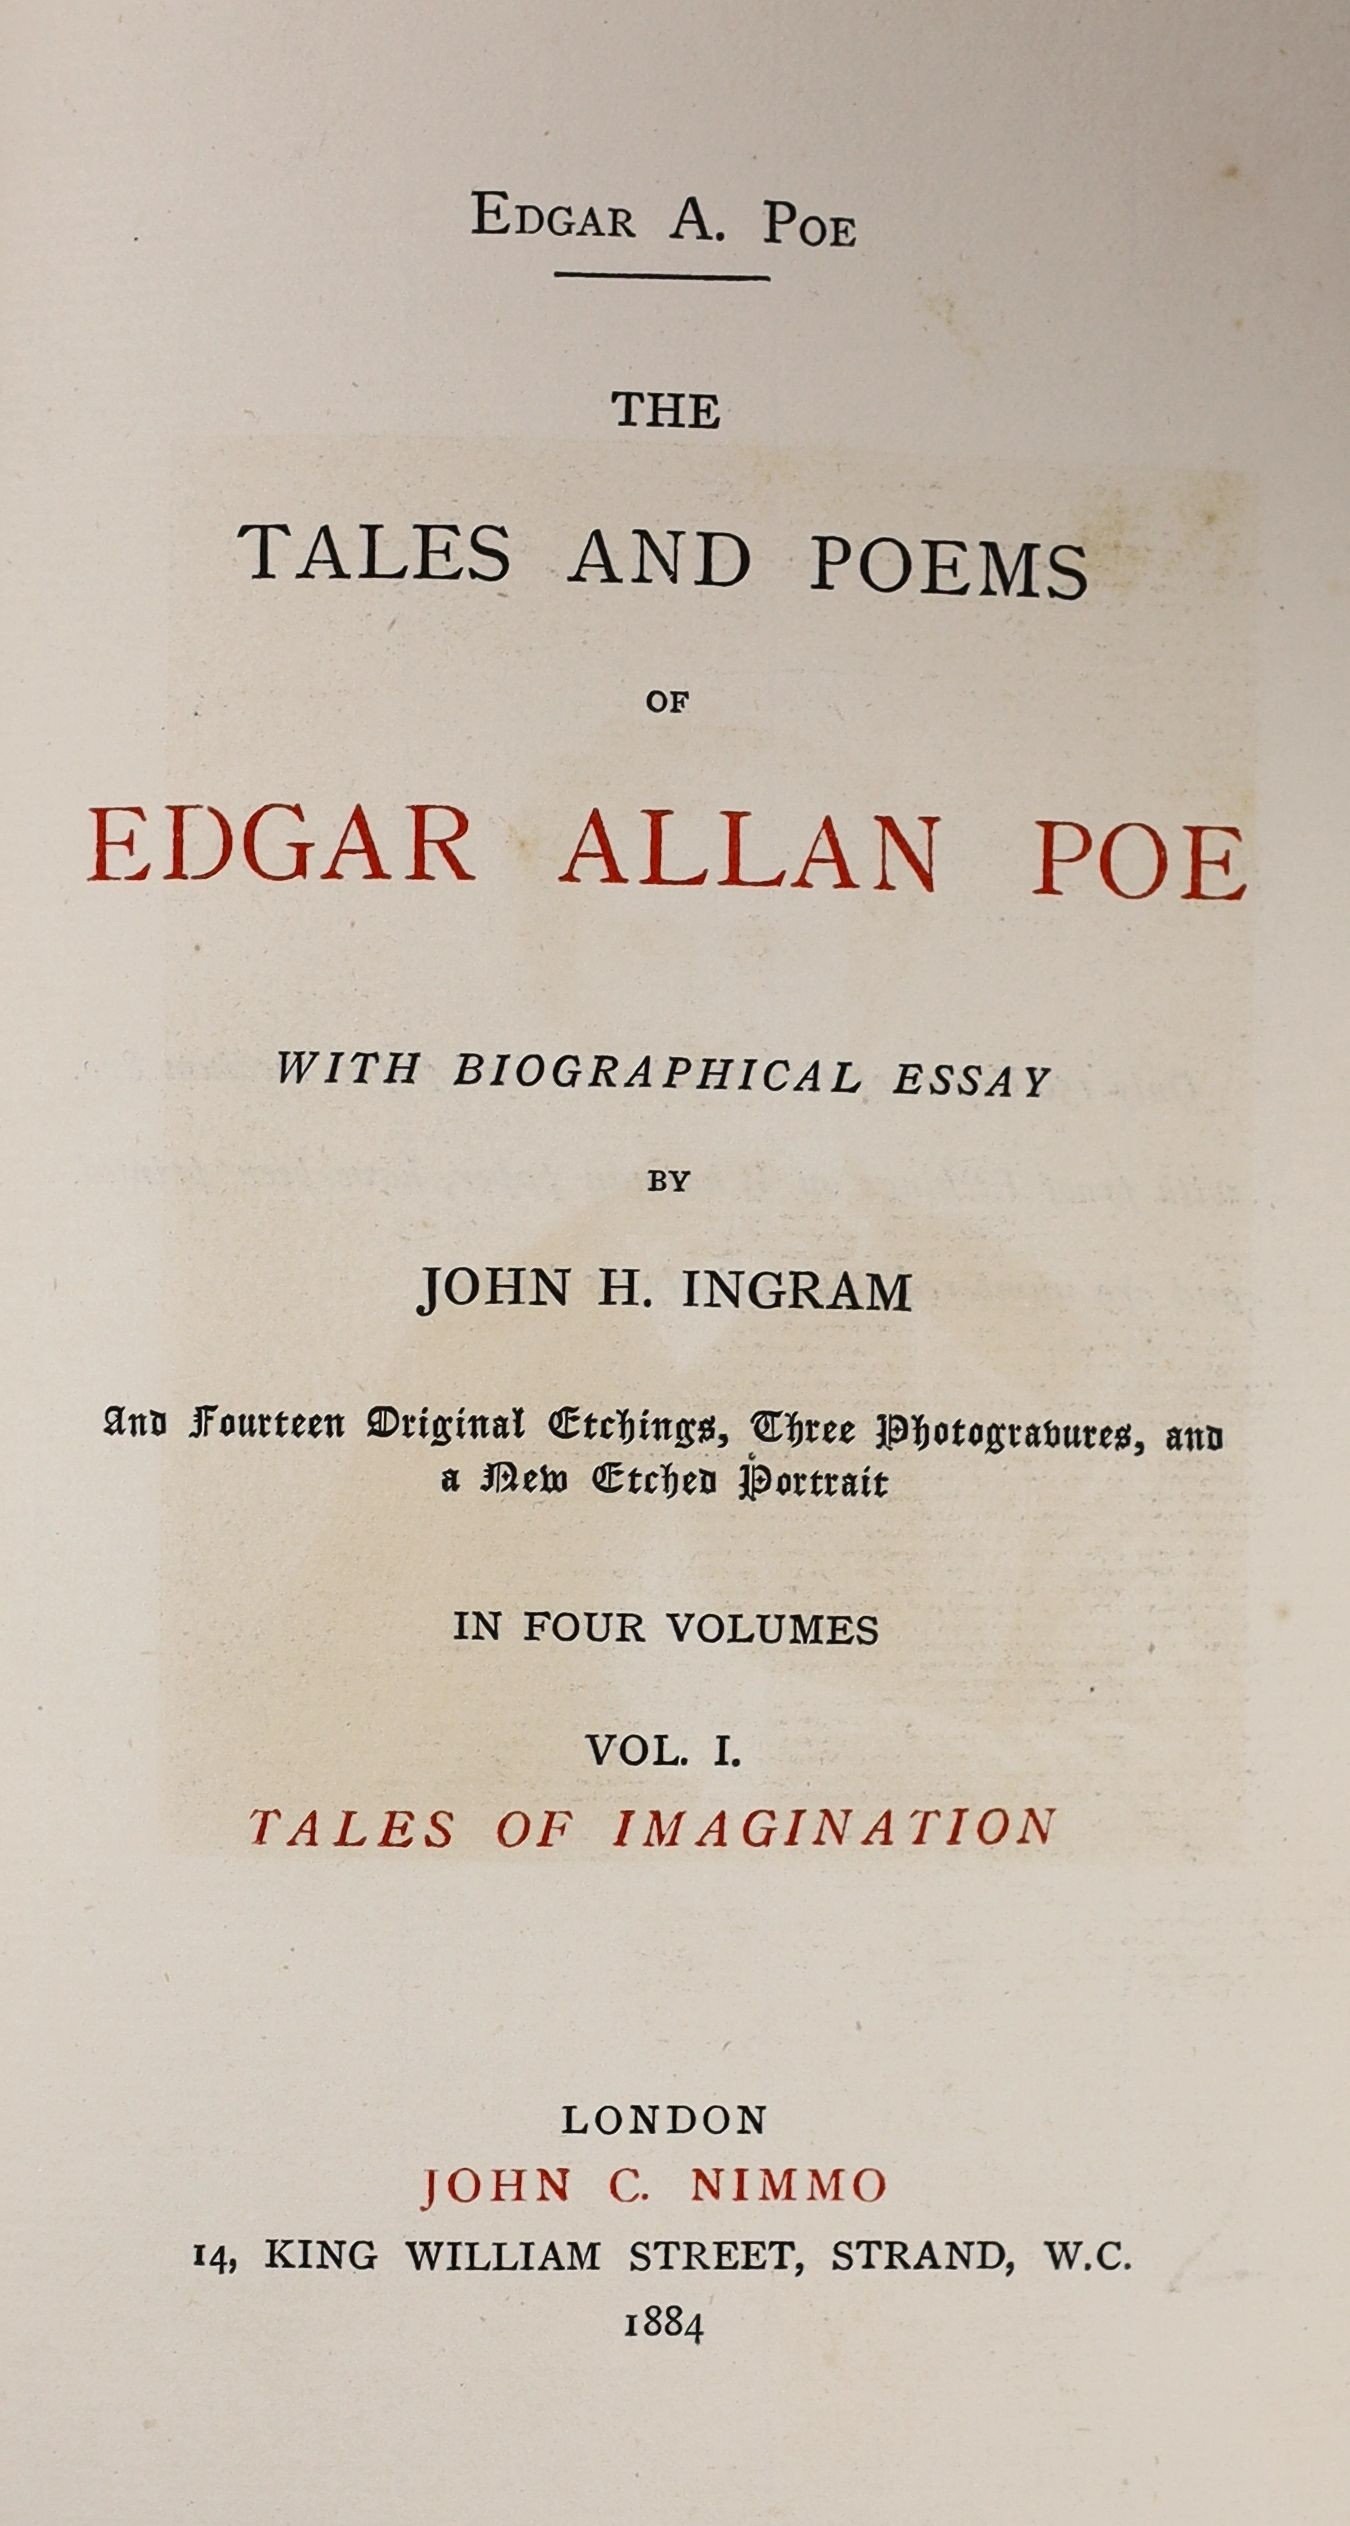 Poe, Edgar A - The Tales and Poems of Edgar Allan Poe, 4 vols, one of 150, 8vo, brown half morocco gilt, with engraved frontis, John C. Nimmo, London, 1884